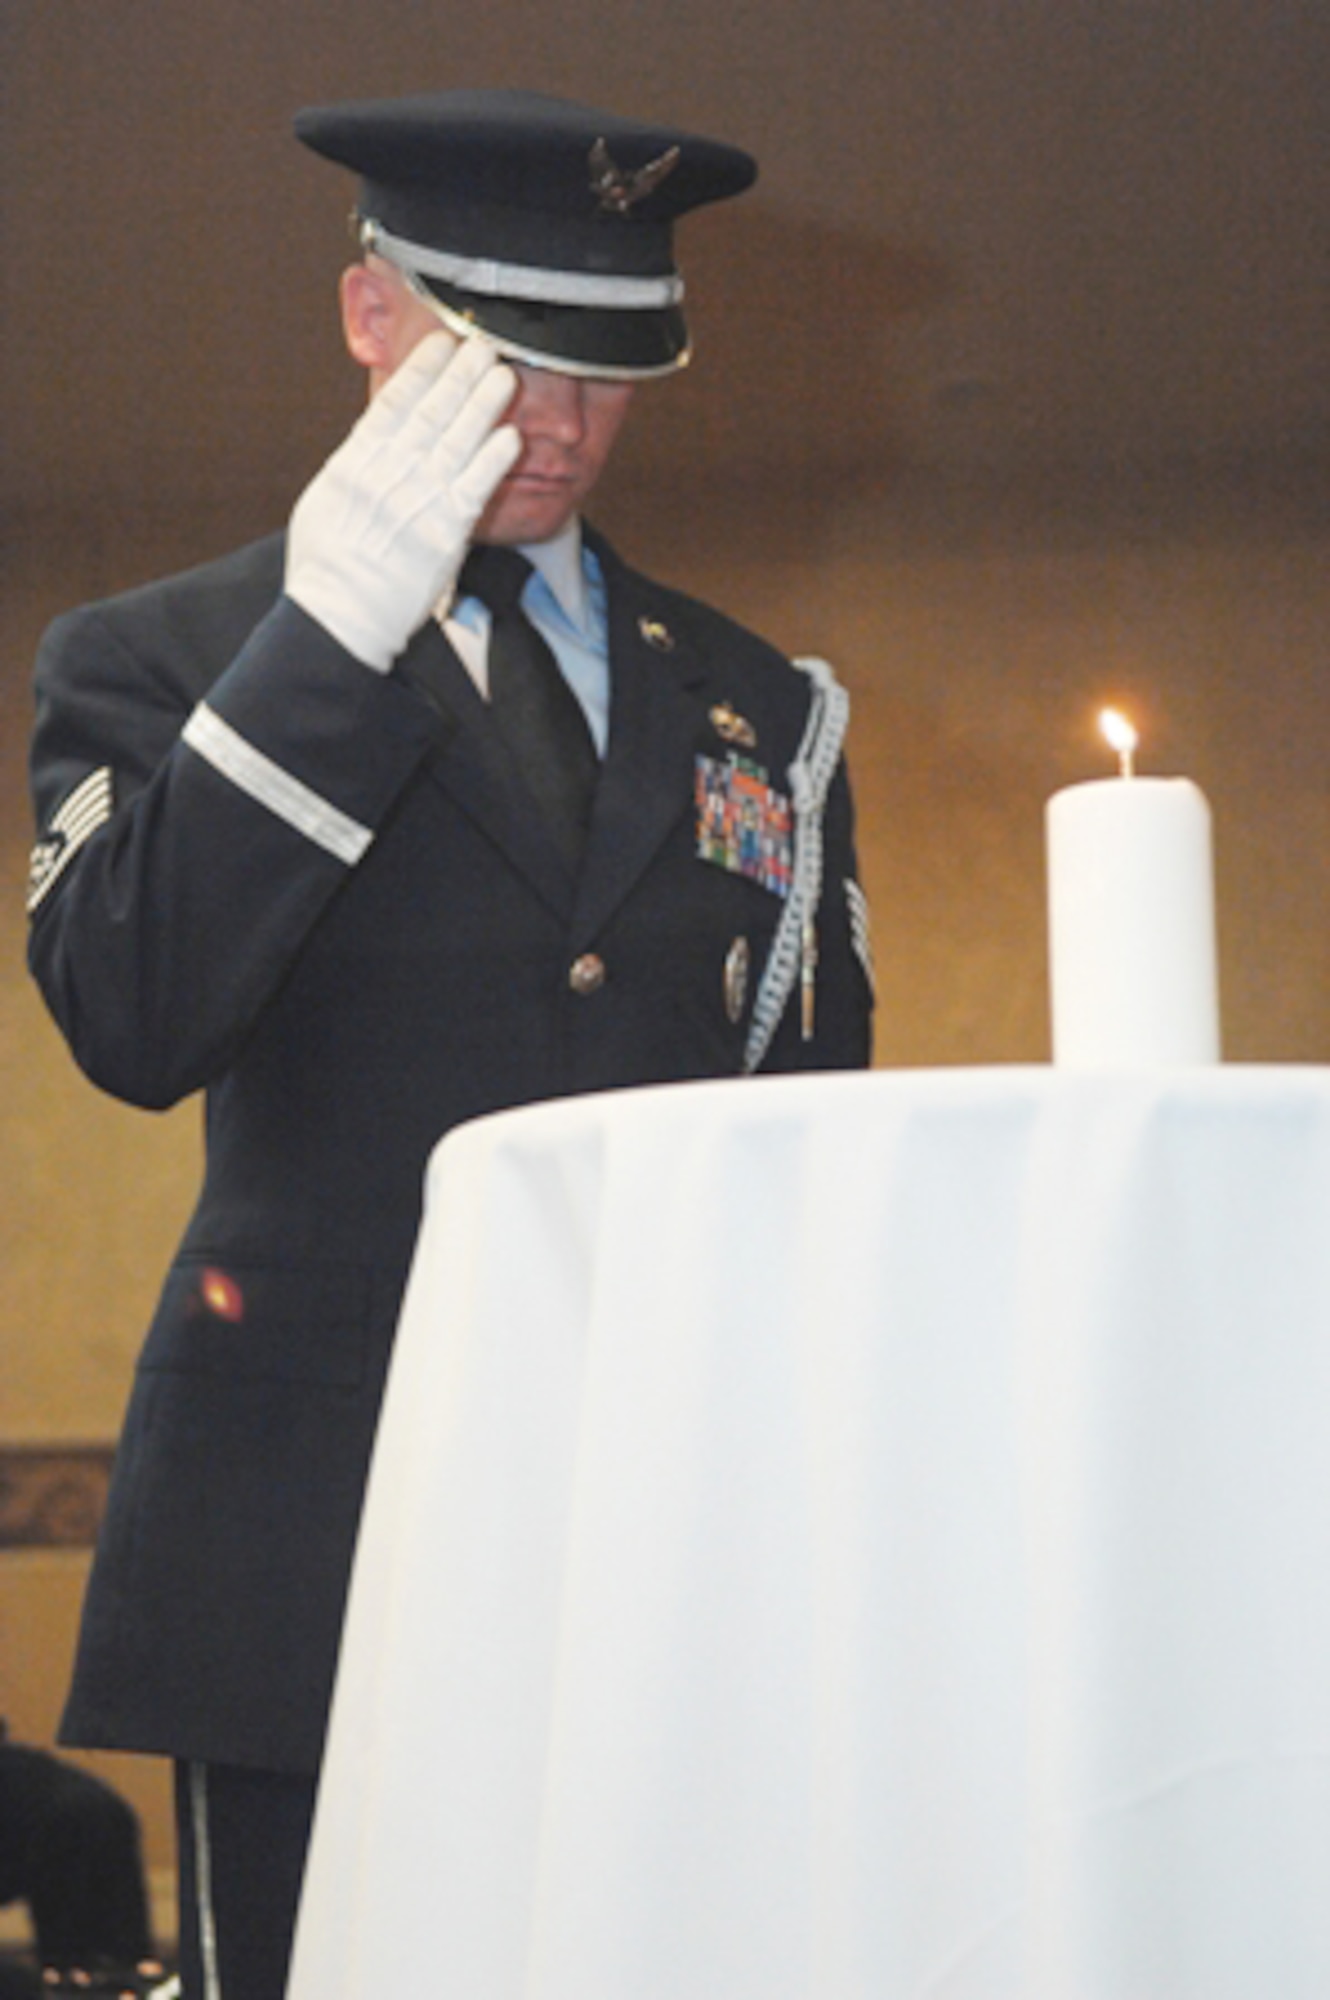 Staff Sgt. Chadd Wheeler salutes a candle during the Lonely Eagles Ceremony at the 38th Annual Tuskegee Airman, Inc. convention Aug. 7 in Las Vegas. TAI is a non-profit organization dedicated to honoring the accomplishments of the African-American air, ground and operations crew members in the Army Air Corps during World War II. Sergeant Wheeler is a 820th RED HORSE Squadron member from Nellis Air Force Base, Nev. (U.S. Air Force photo/Senior Airman Joseph Araiza) 
